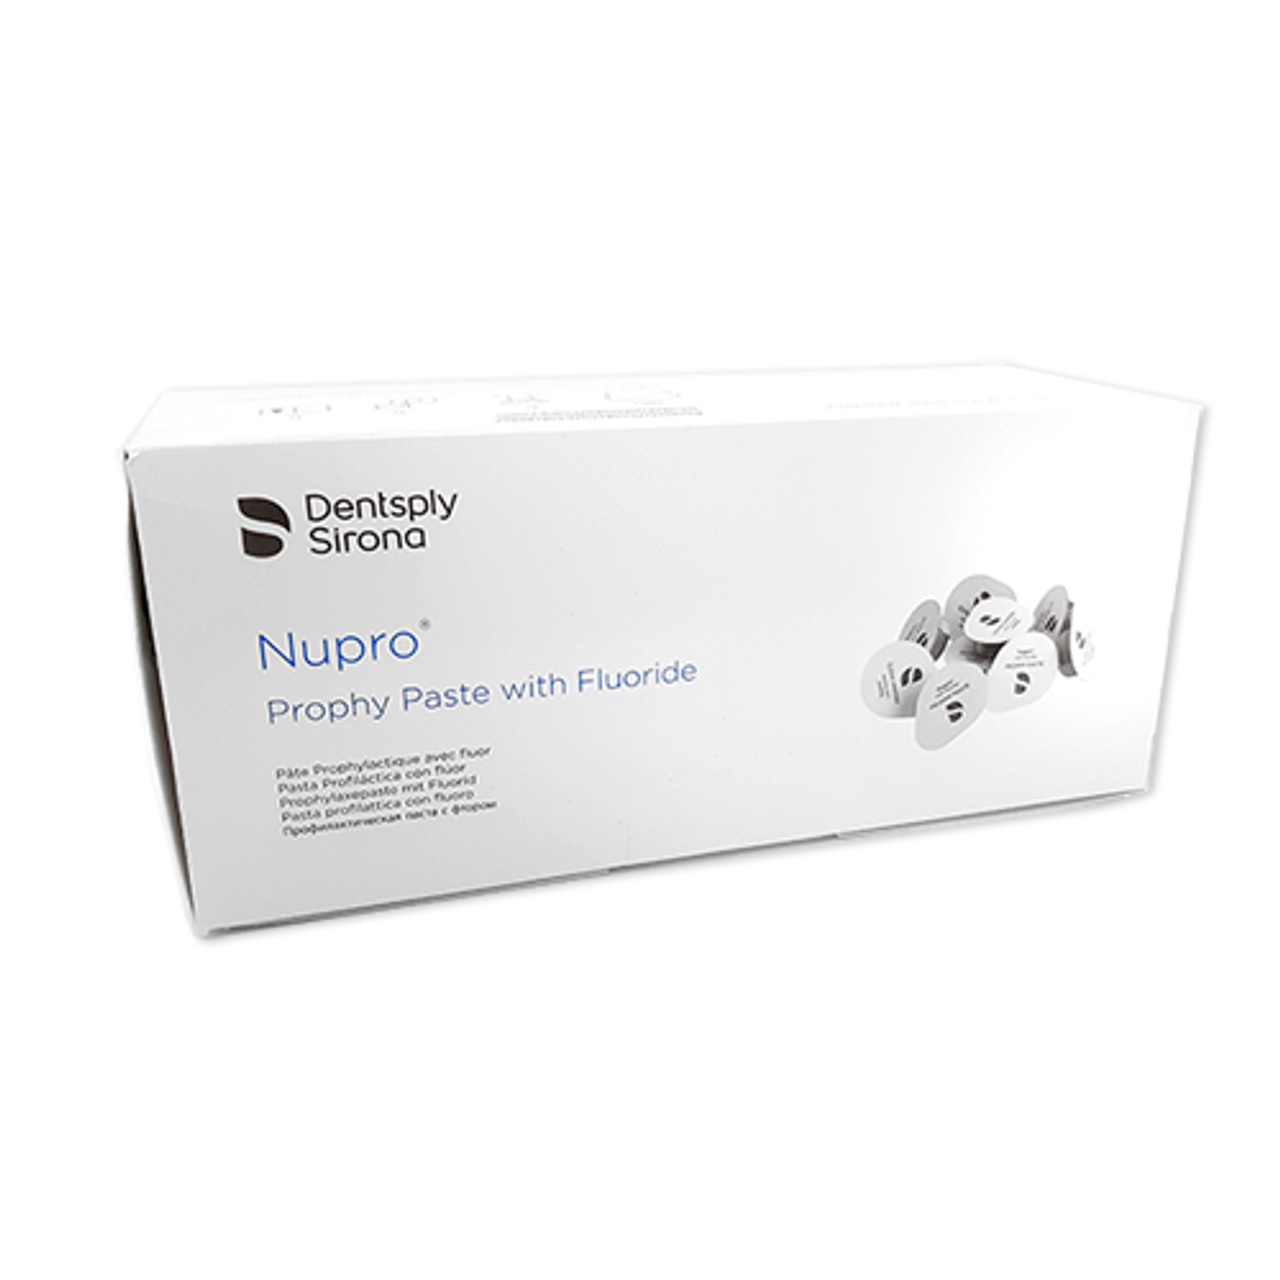 Dentsply Nupro Coarse Mint Prophy Paste for Effective Fluoride-Infused Polishing - 200 Unit Dose Cups